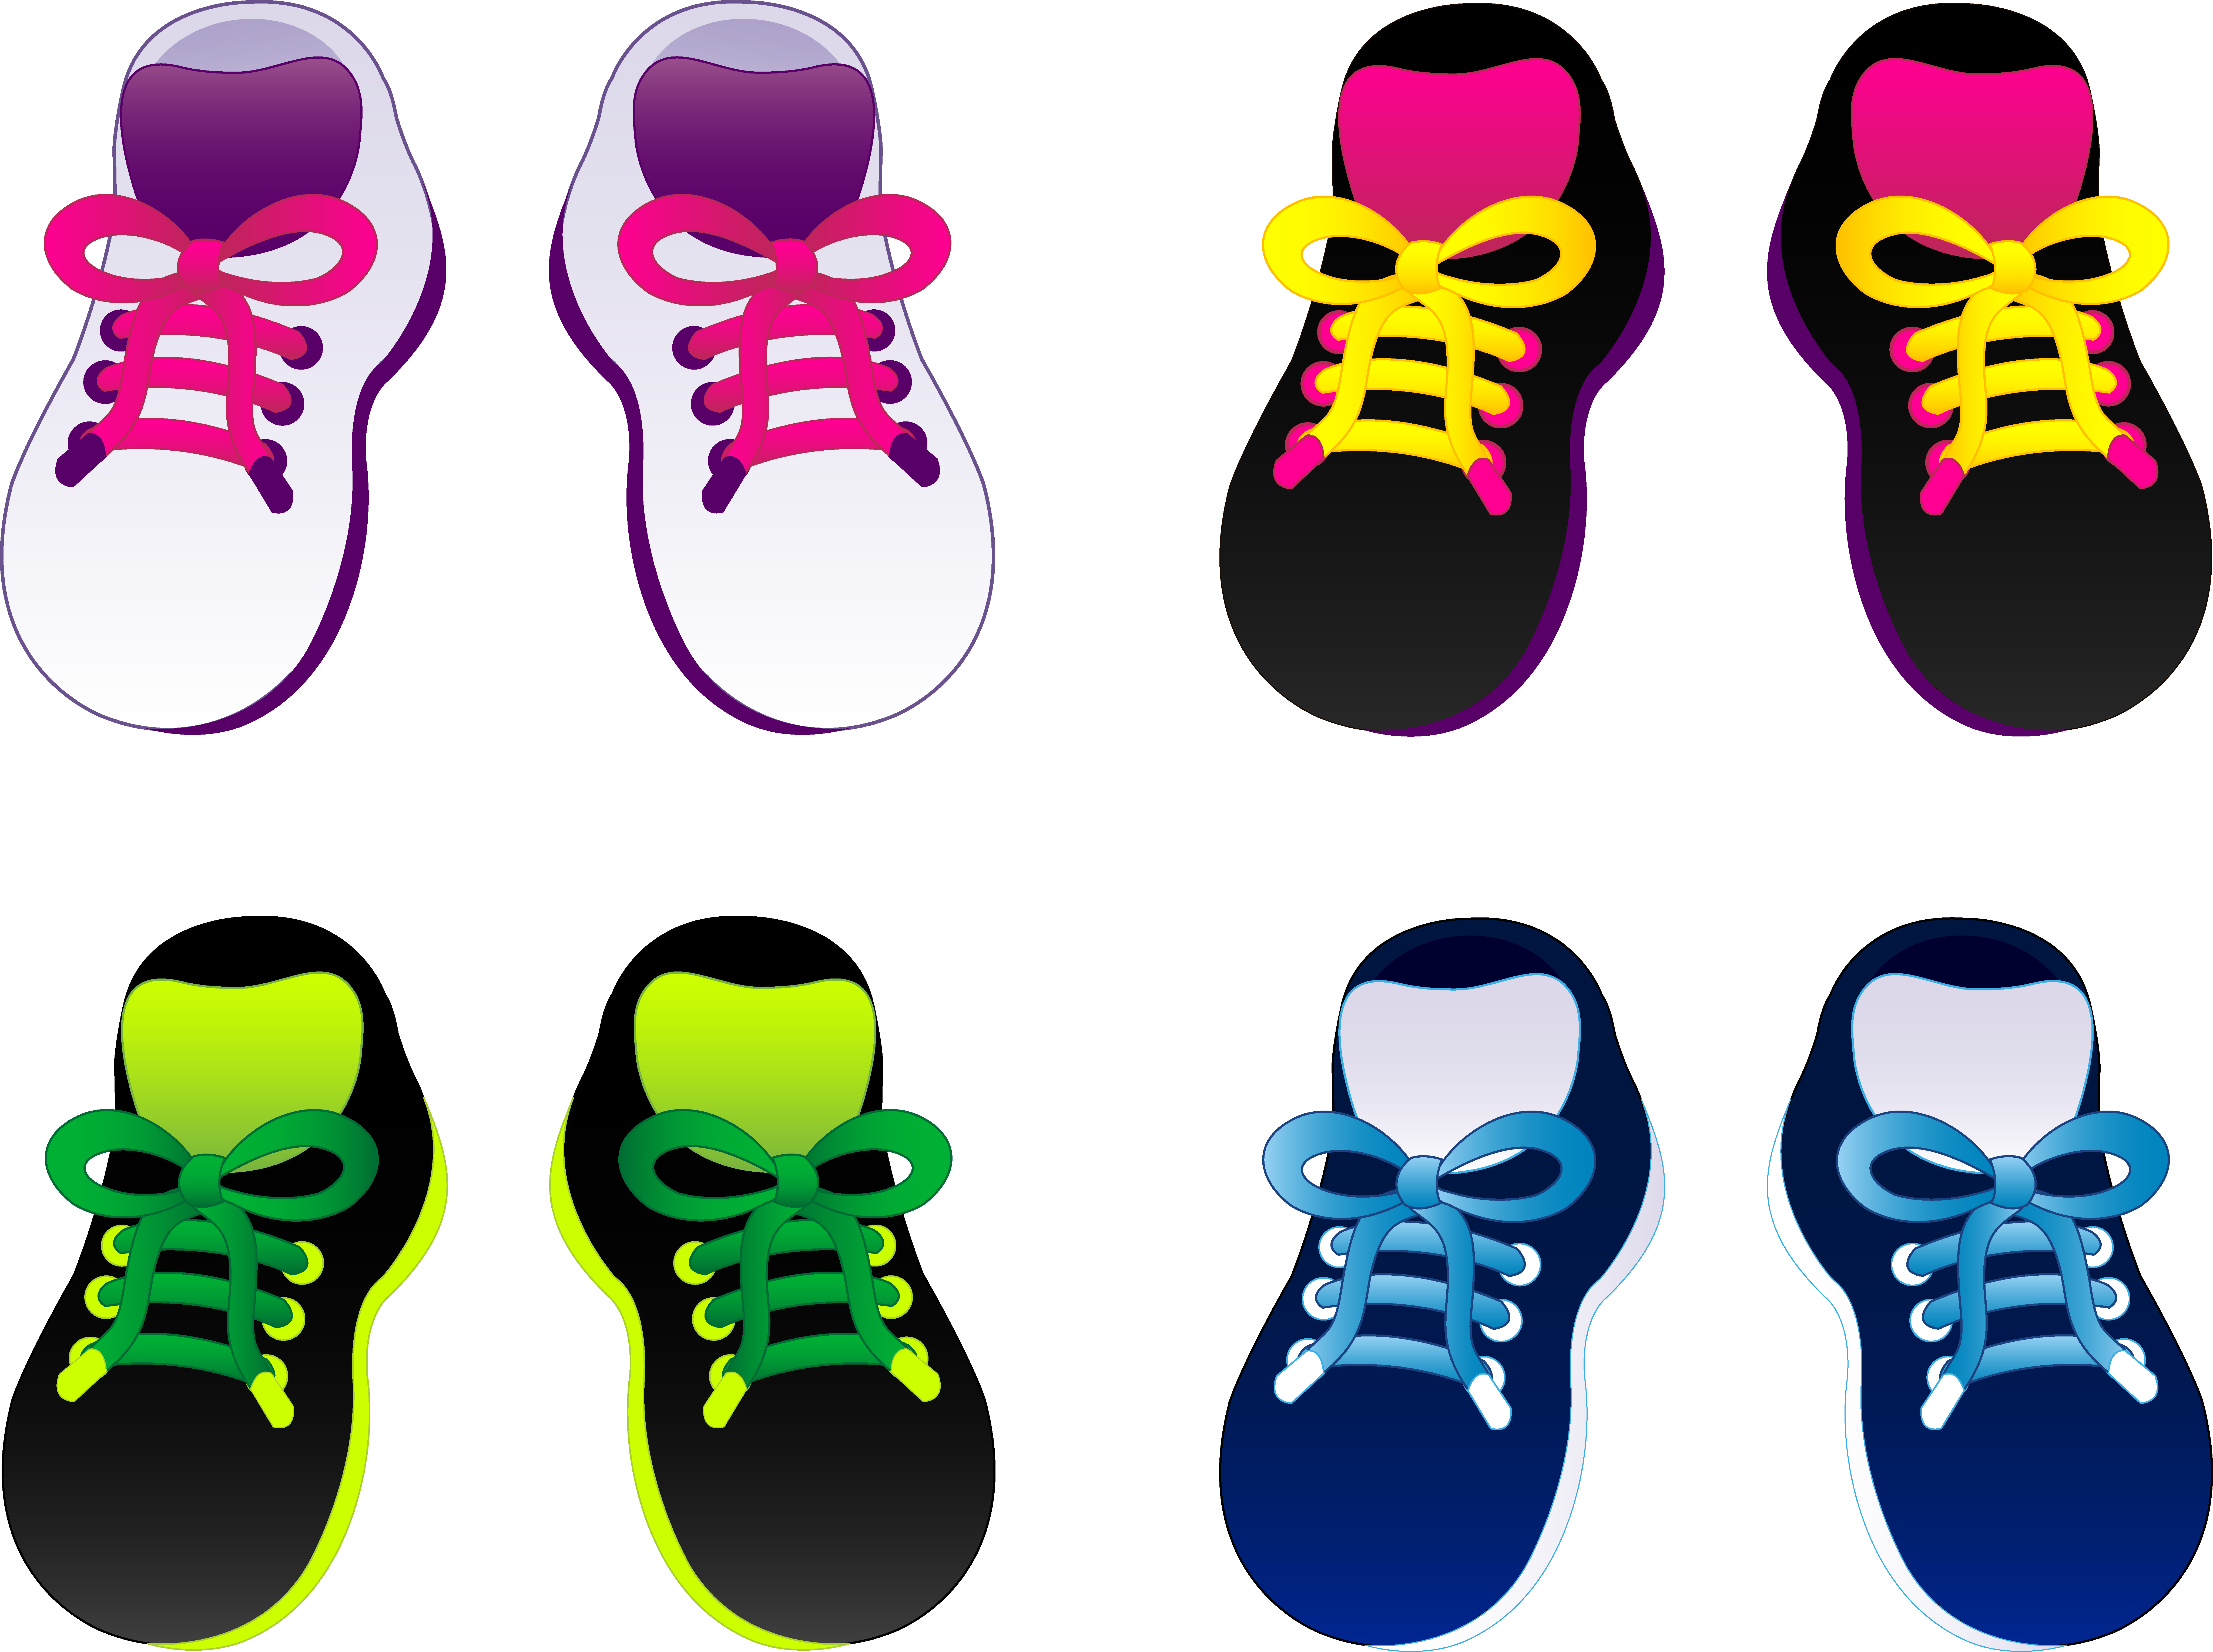 Clip Arts Related To : shoes clip art. view all Tennis Shoes Clipart). 